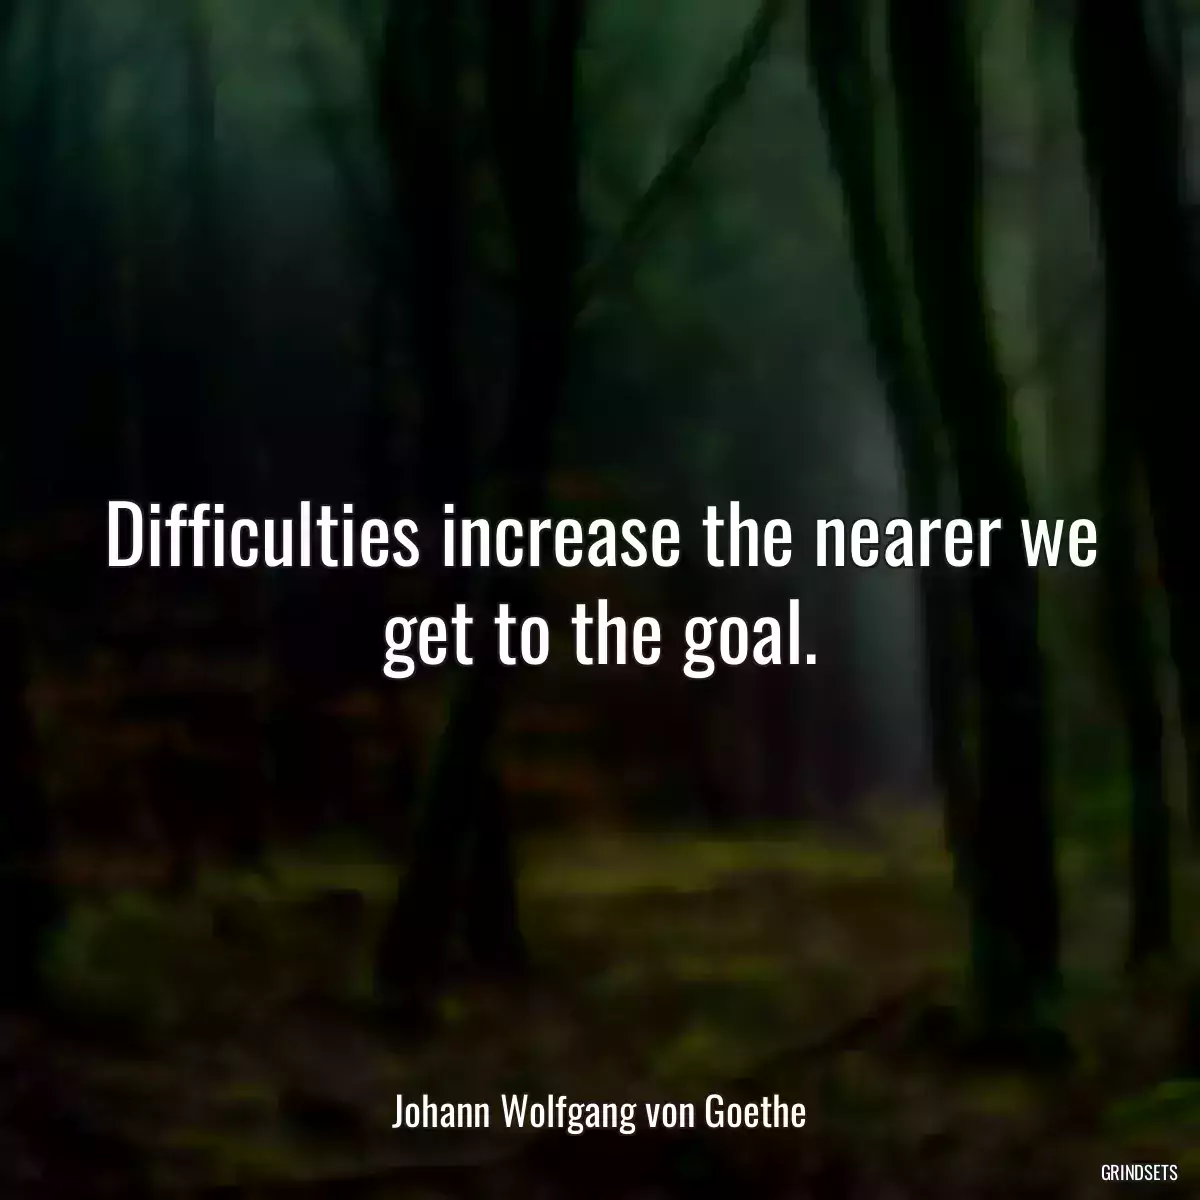 Difficulties increase the nearer we get to the goal.